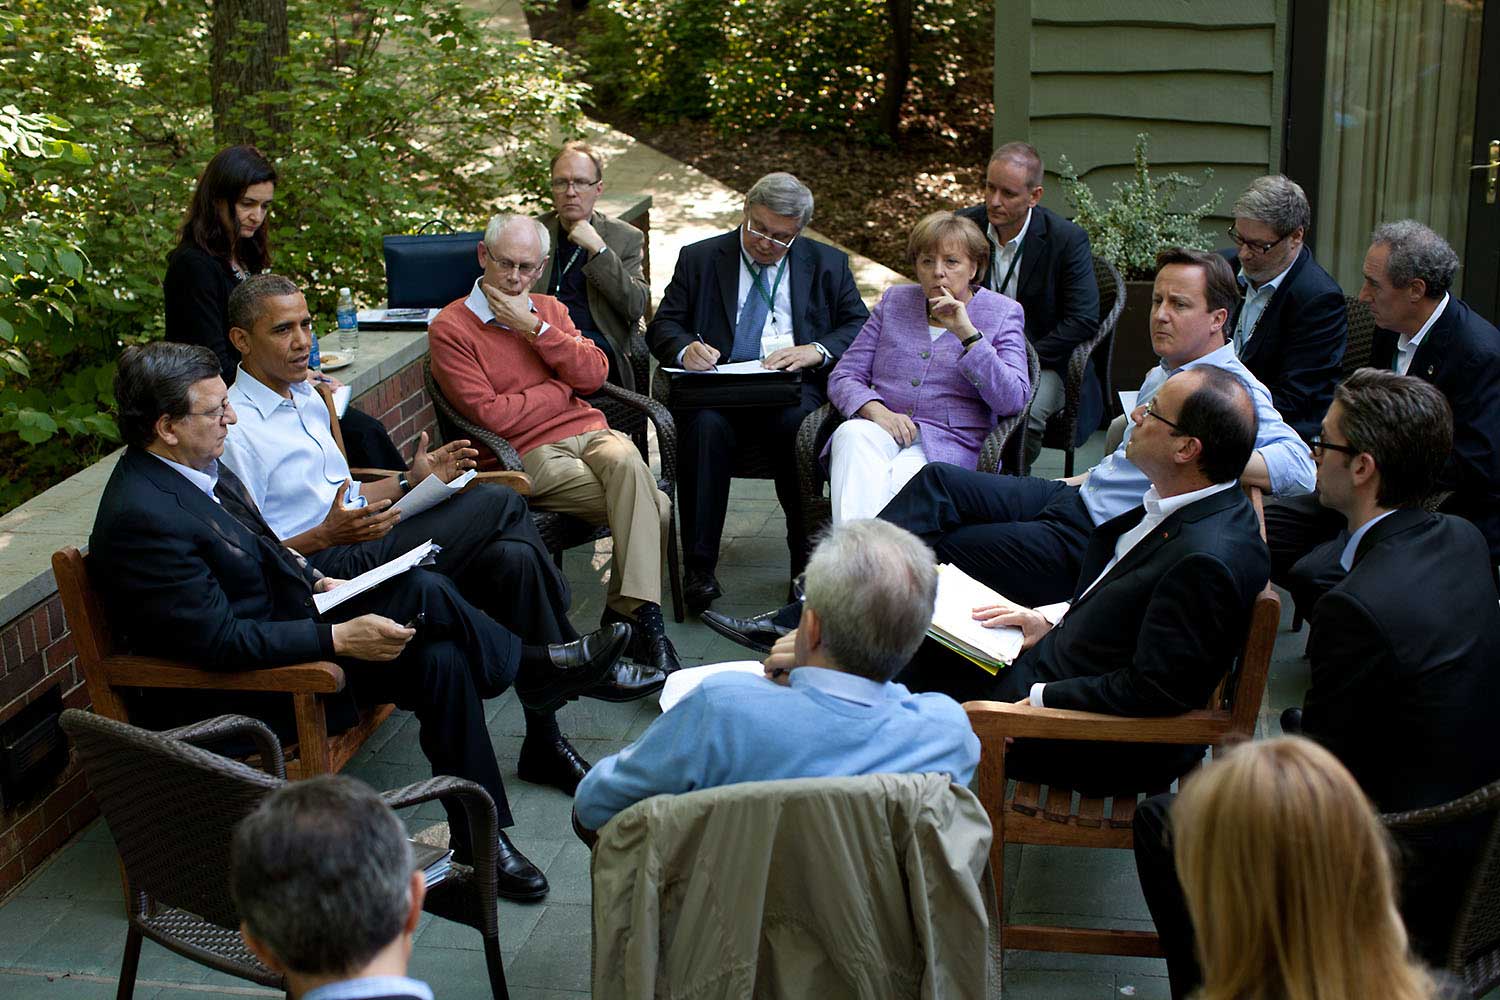 President Obama meets with European leaders on the Laurel Cabin patio during the G8 Summit at Camp David, Md., May 19, 2012.